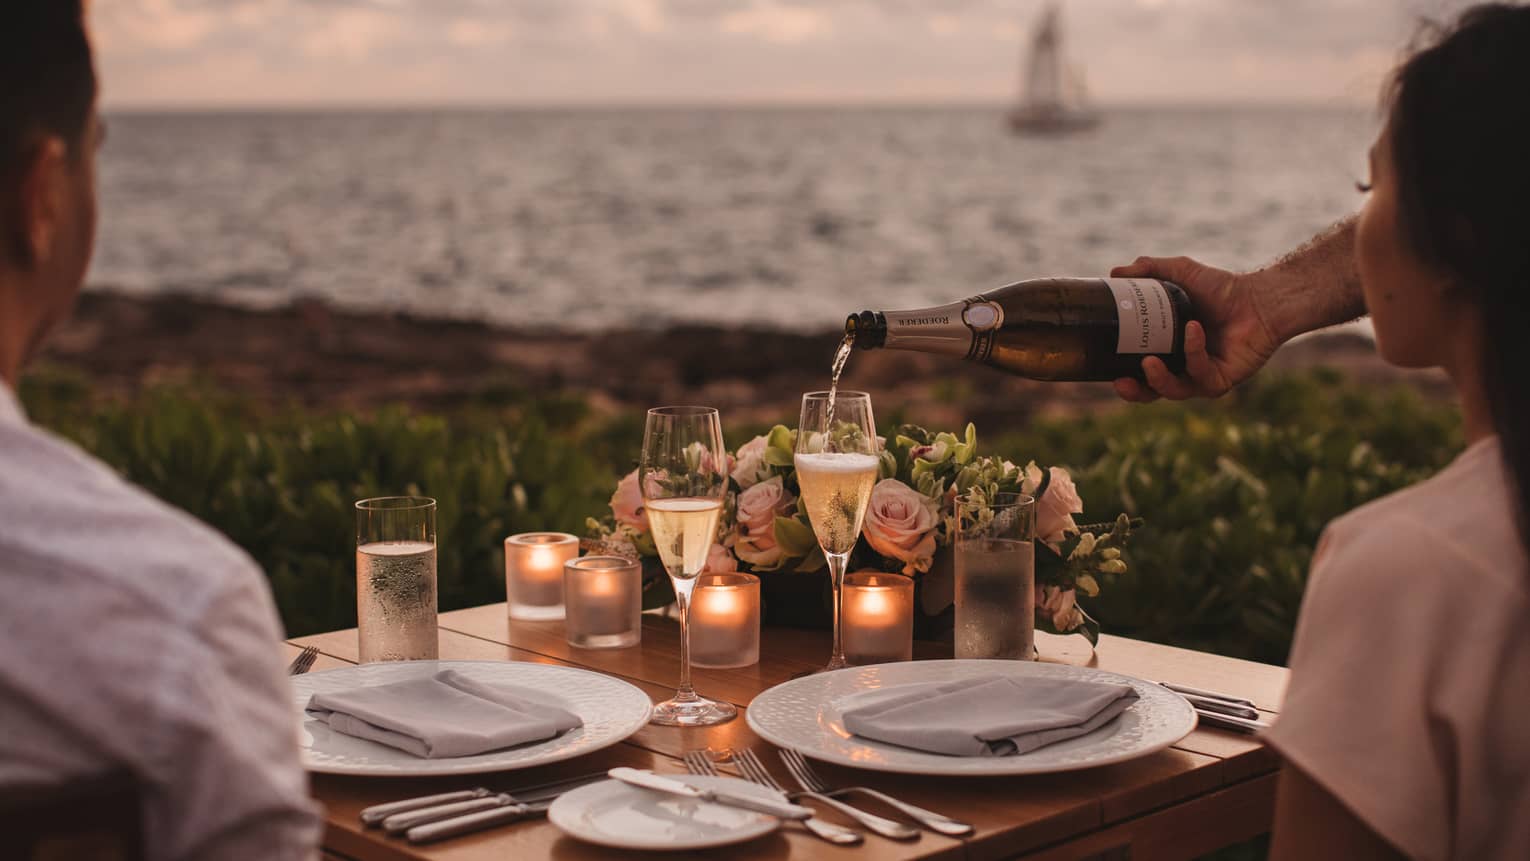 A couple having a private dinner on a coast with a sailboat in the distance.